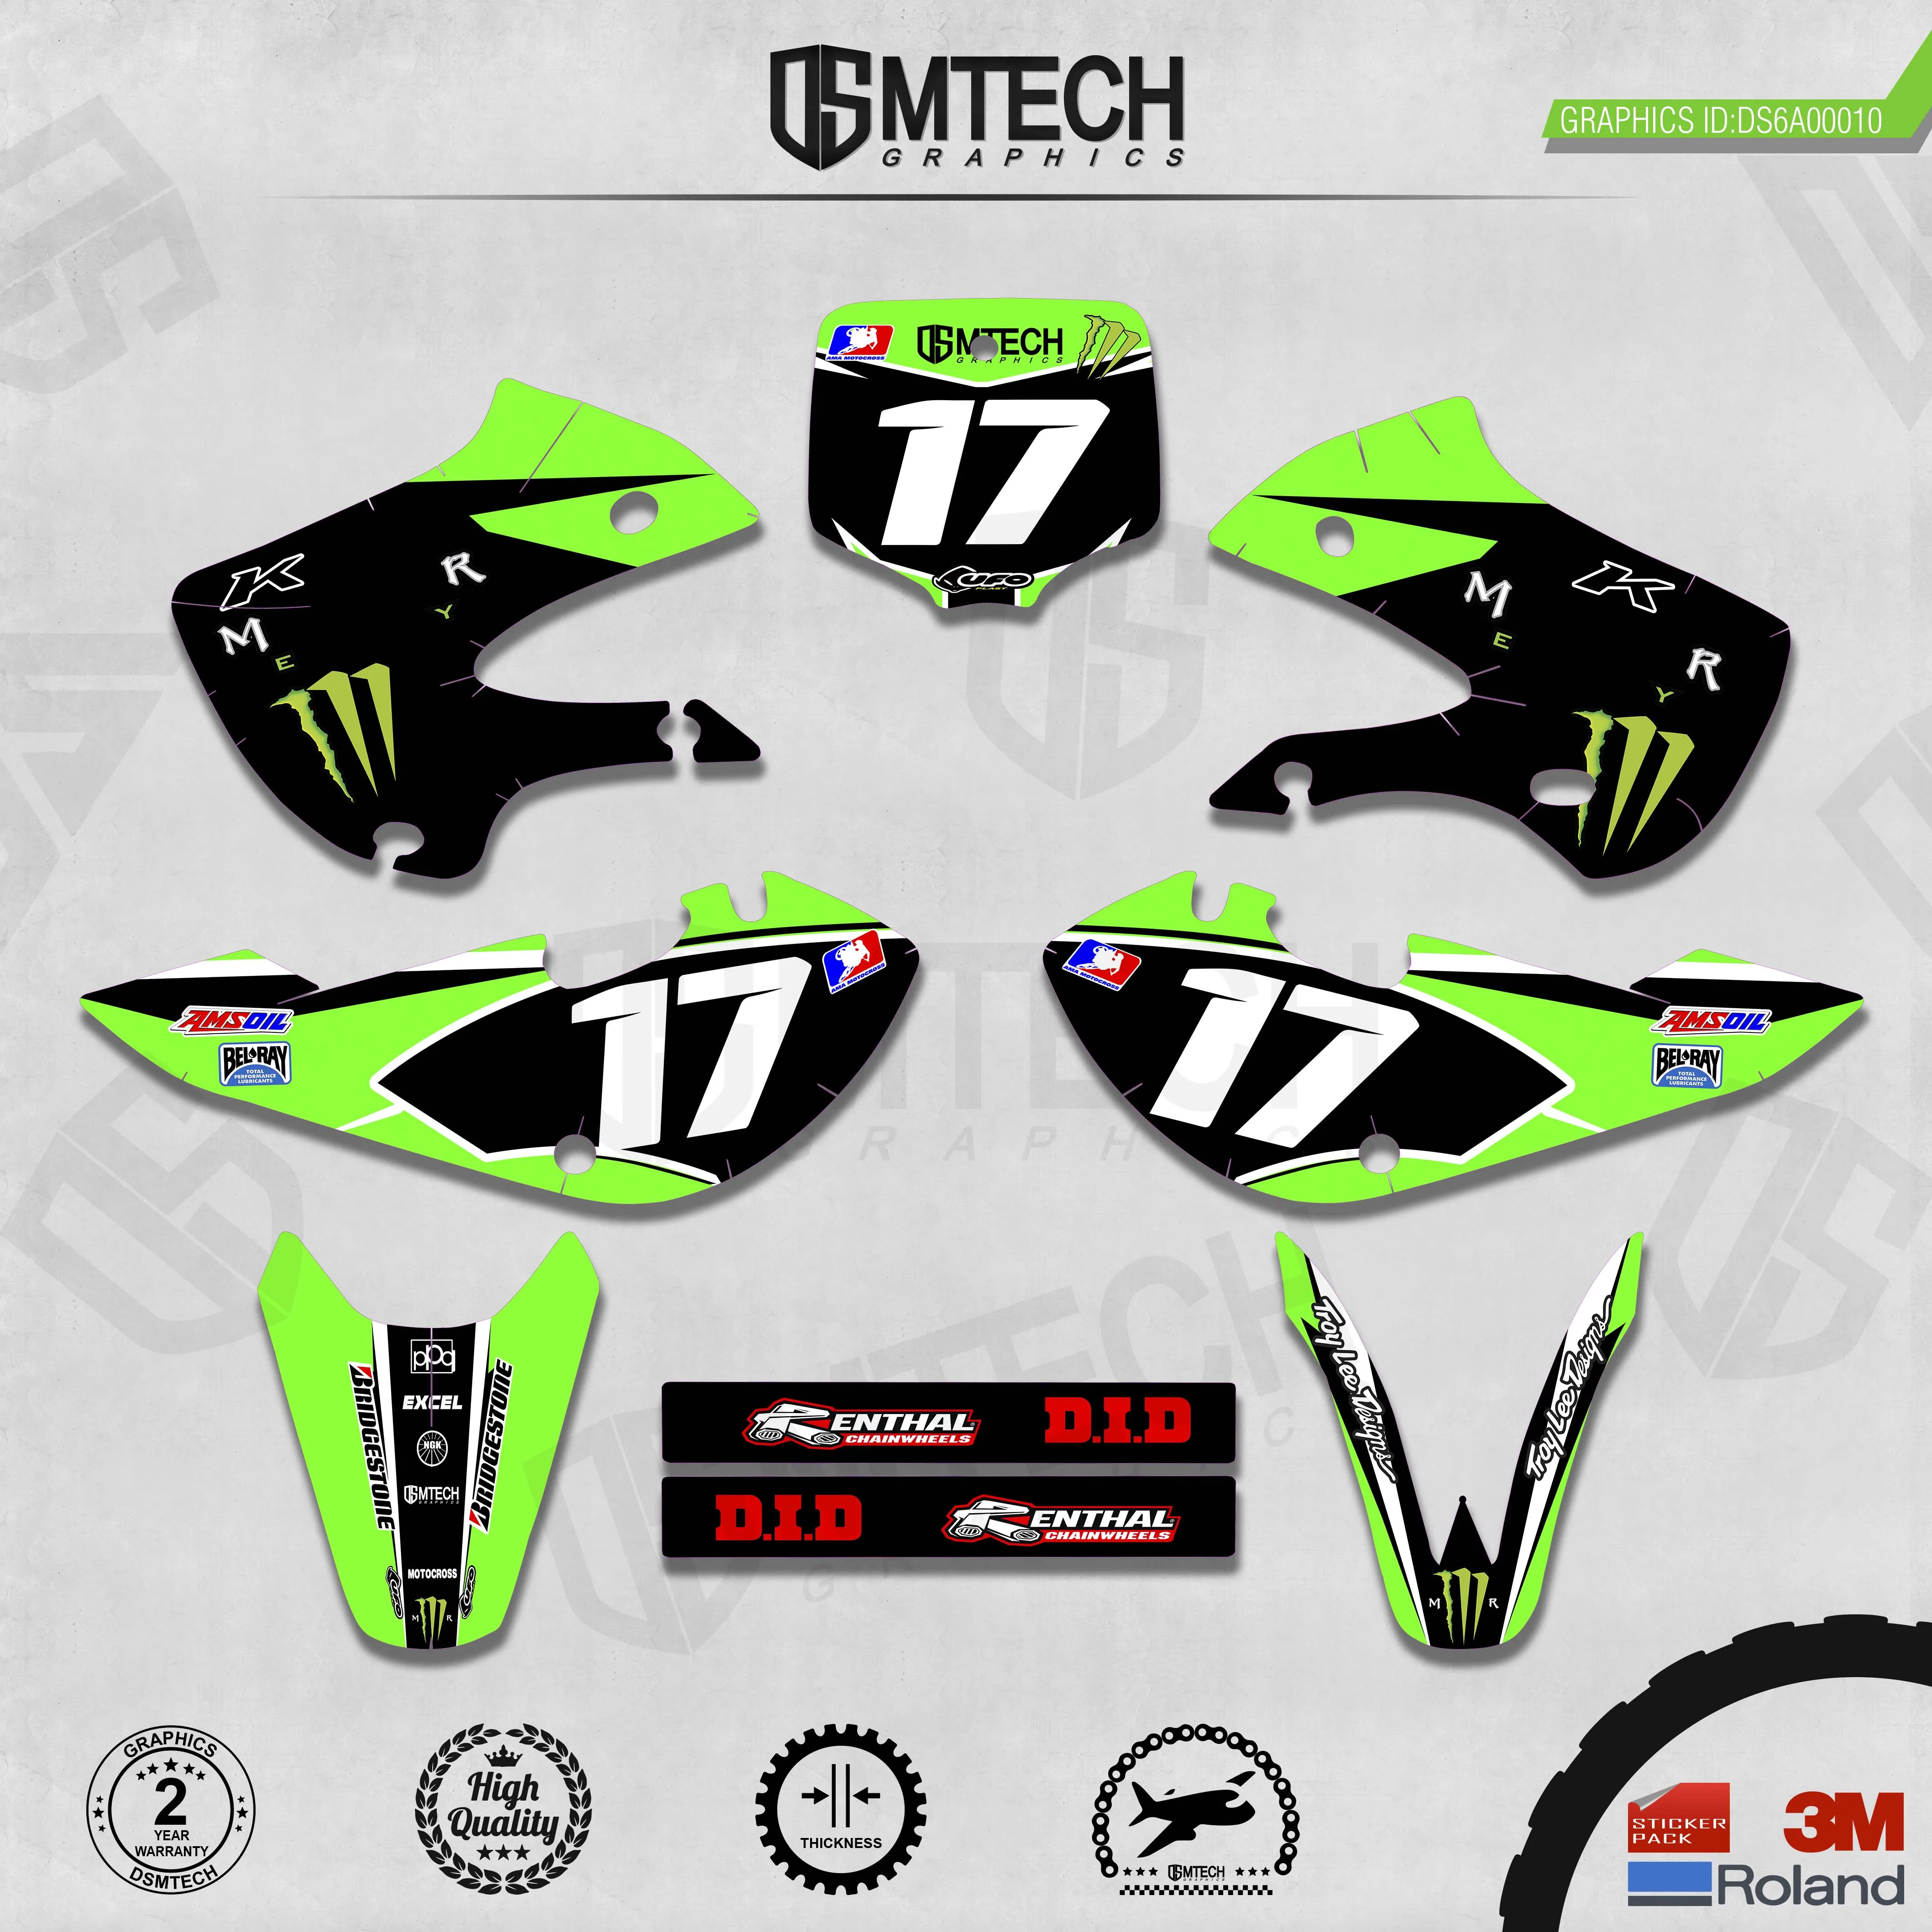 DSMTECH Customized Team Graphics Backgrounds Decals 3M Custom Stickers For KAWASAKI  2000-2020 KX65 010